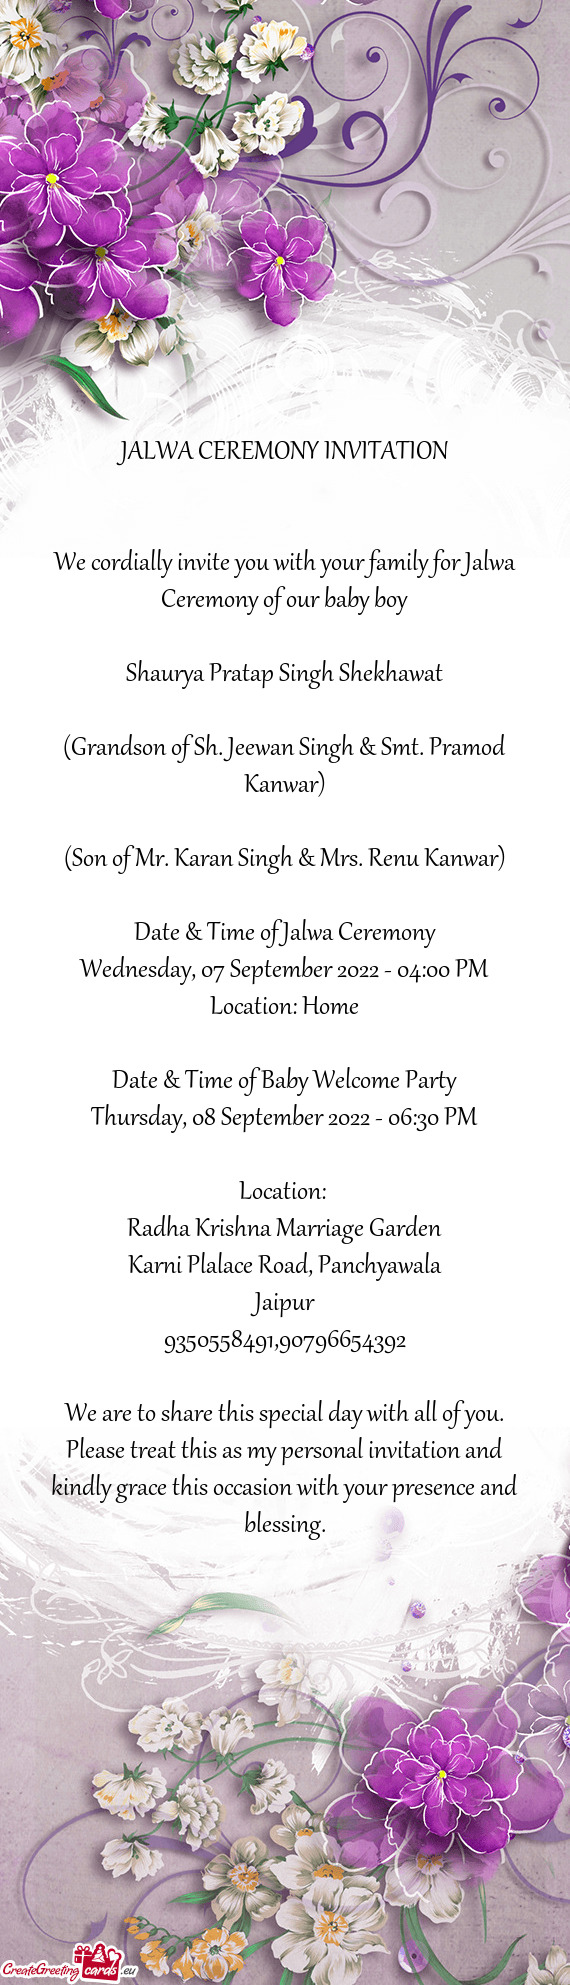 We cordially invite you with your family for Jalwa Ceremony of our baby boy